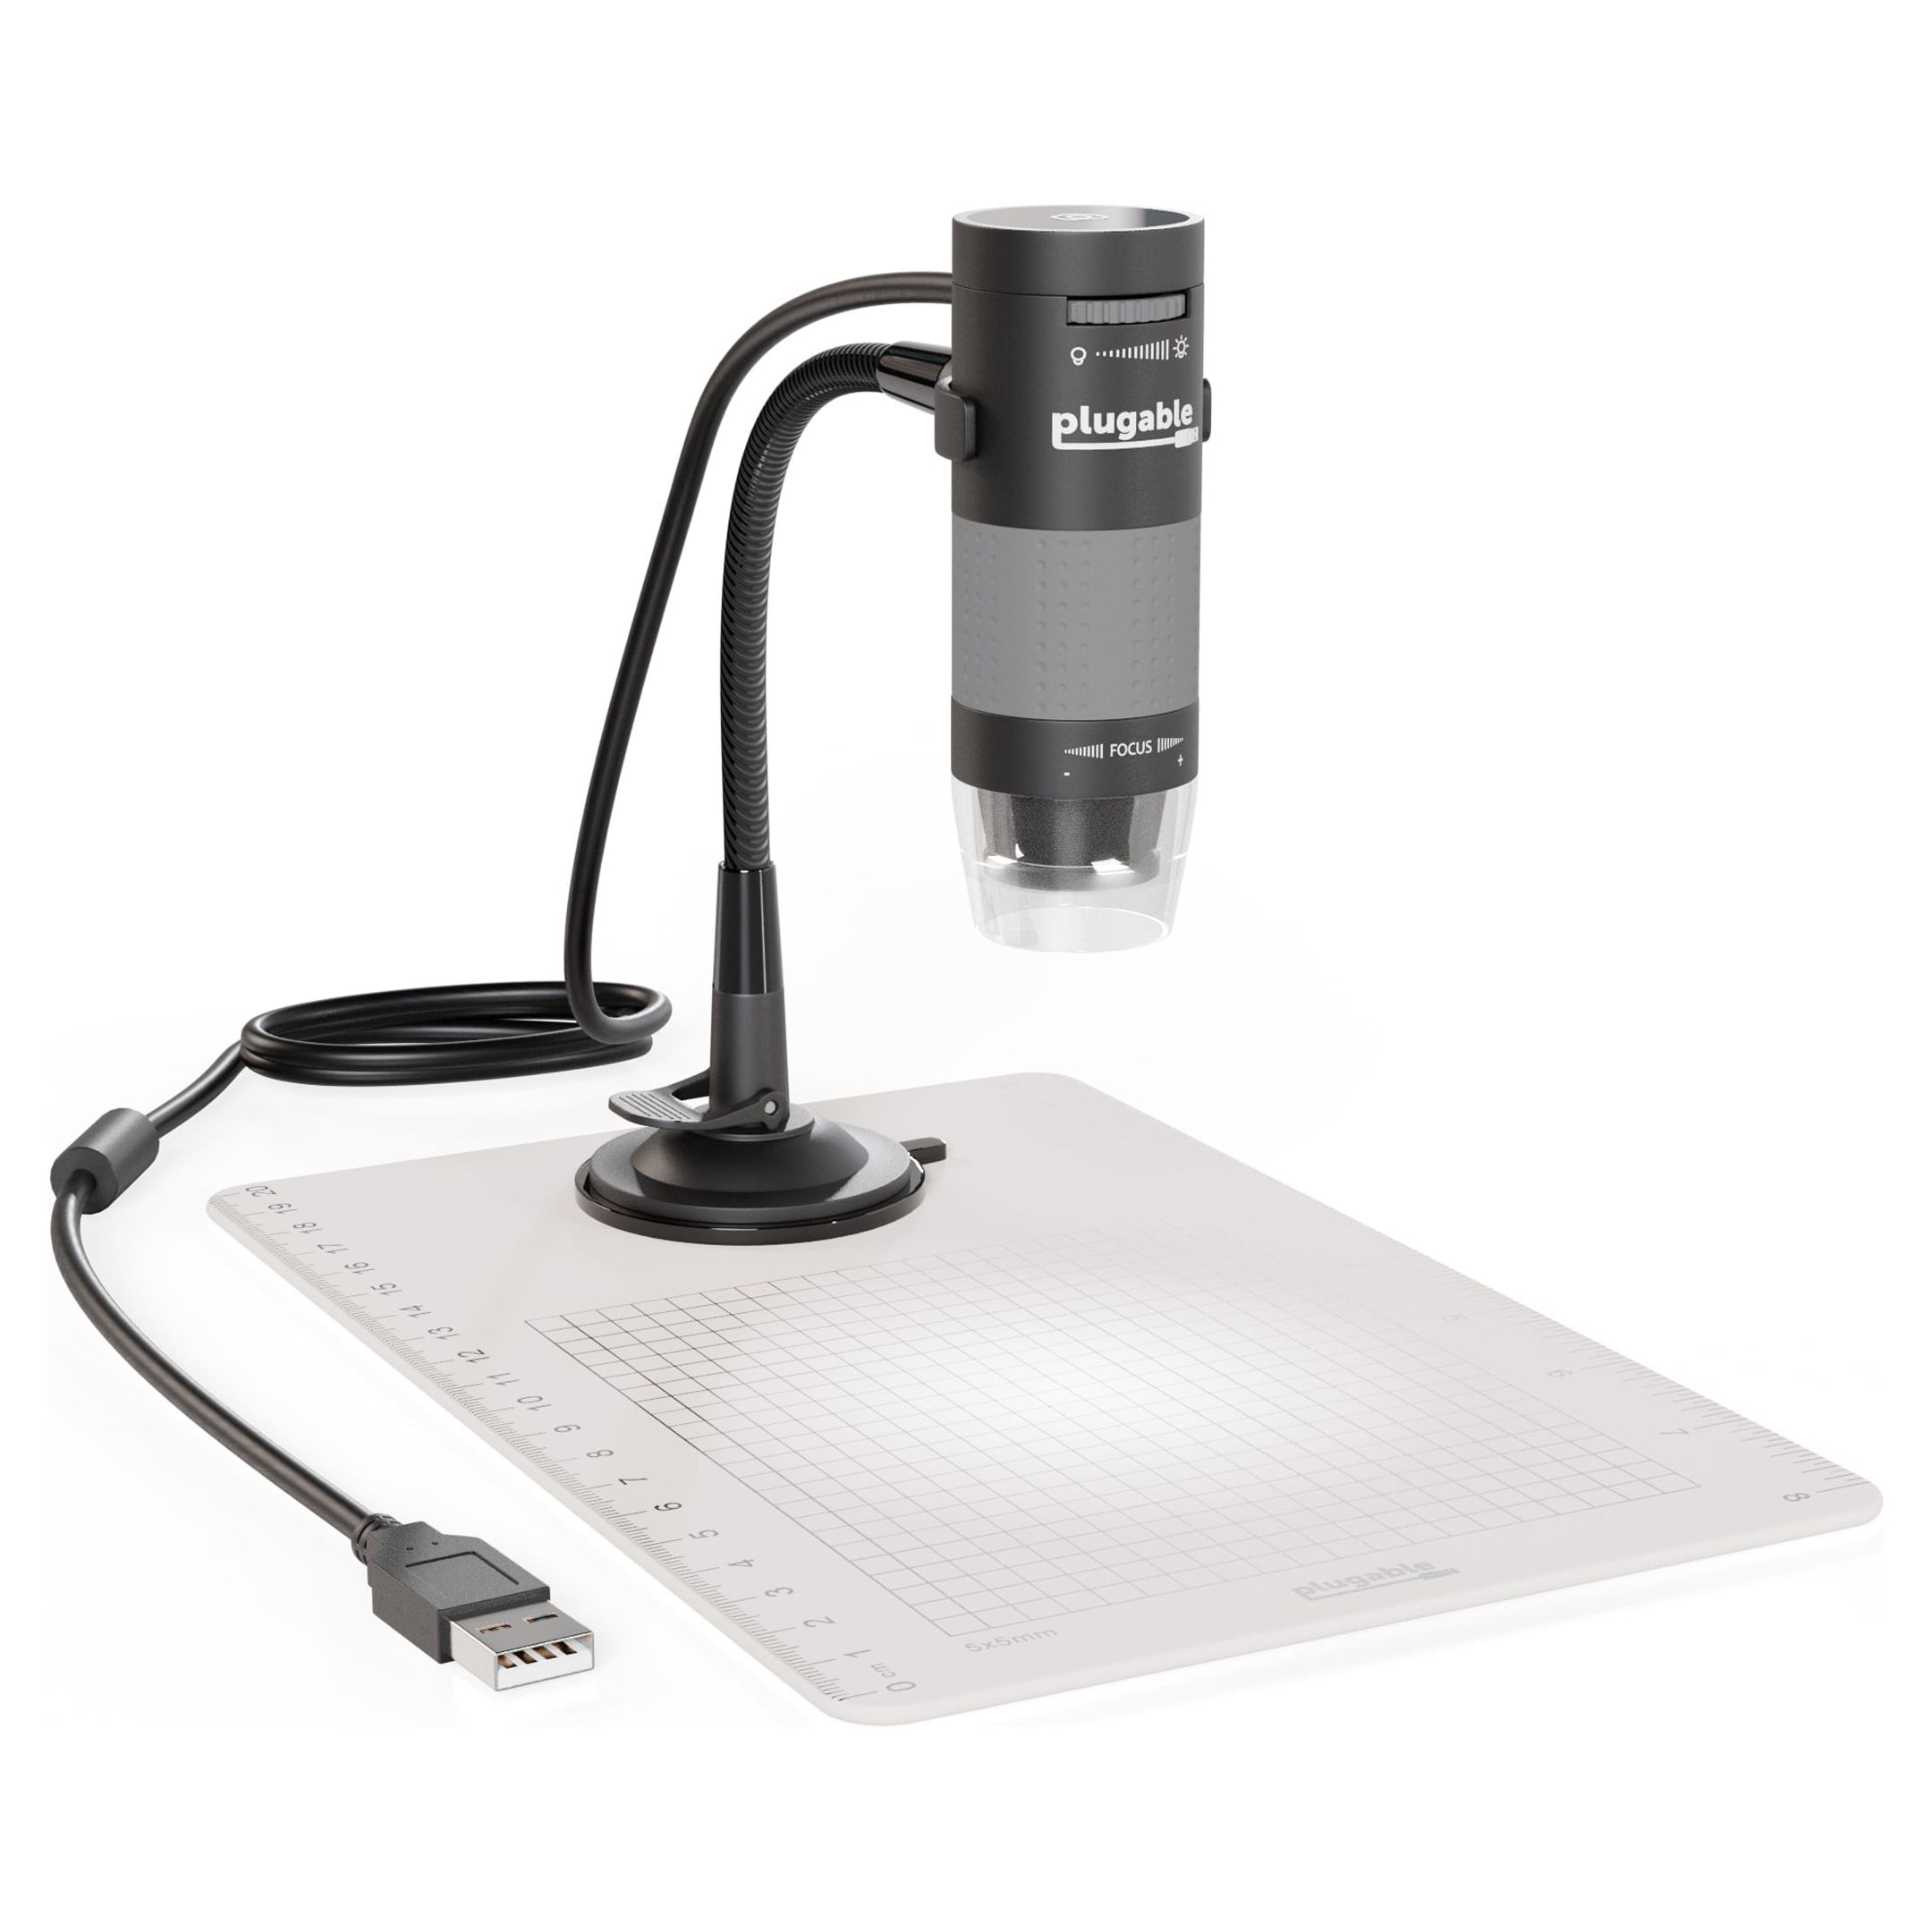 Plugable USB Digital Microscope with Flexible Arm Observation Stand Compatible With Windows, Mac, Linux (2MP, 250x Magnification) - image 1 of 8